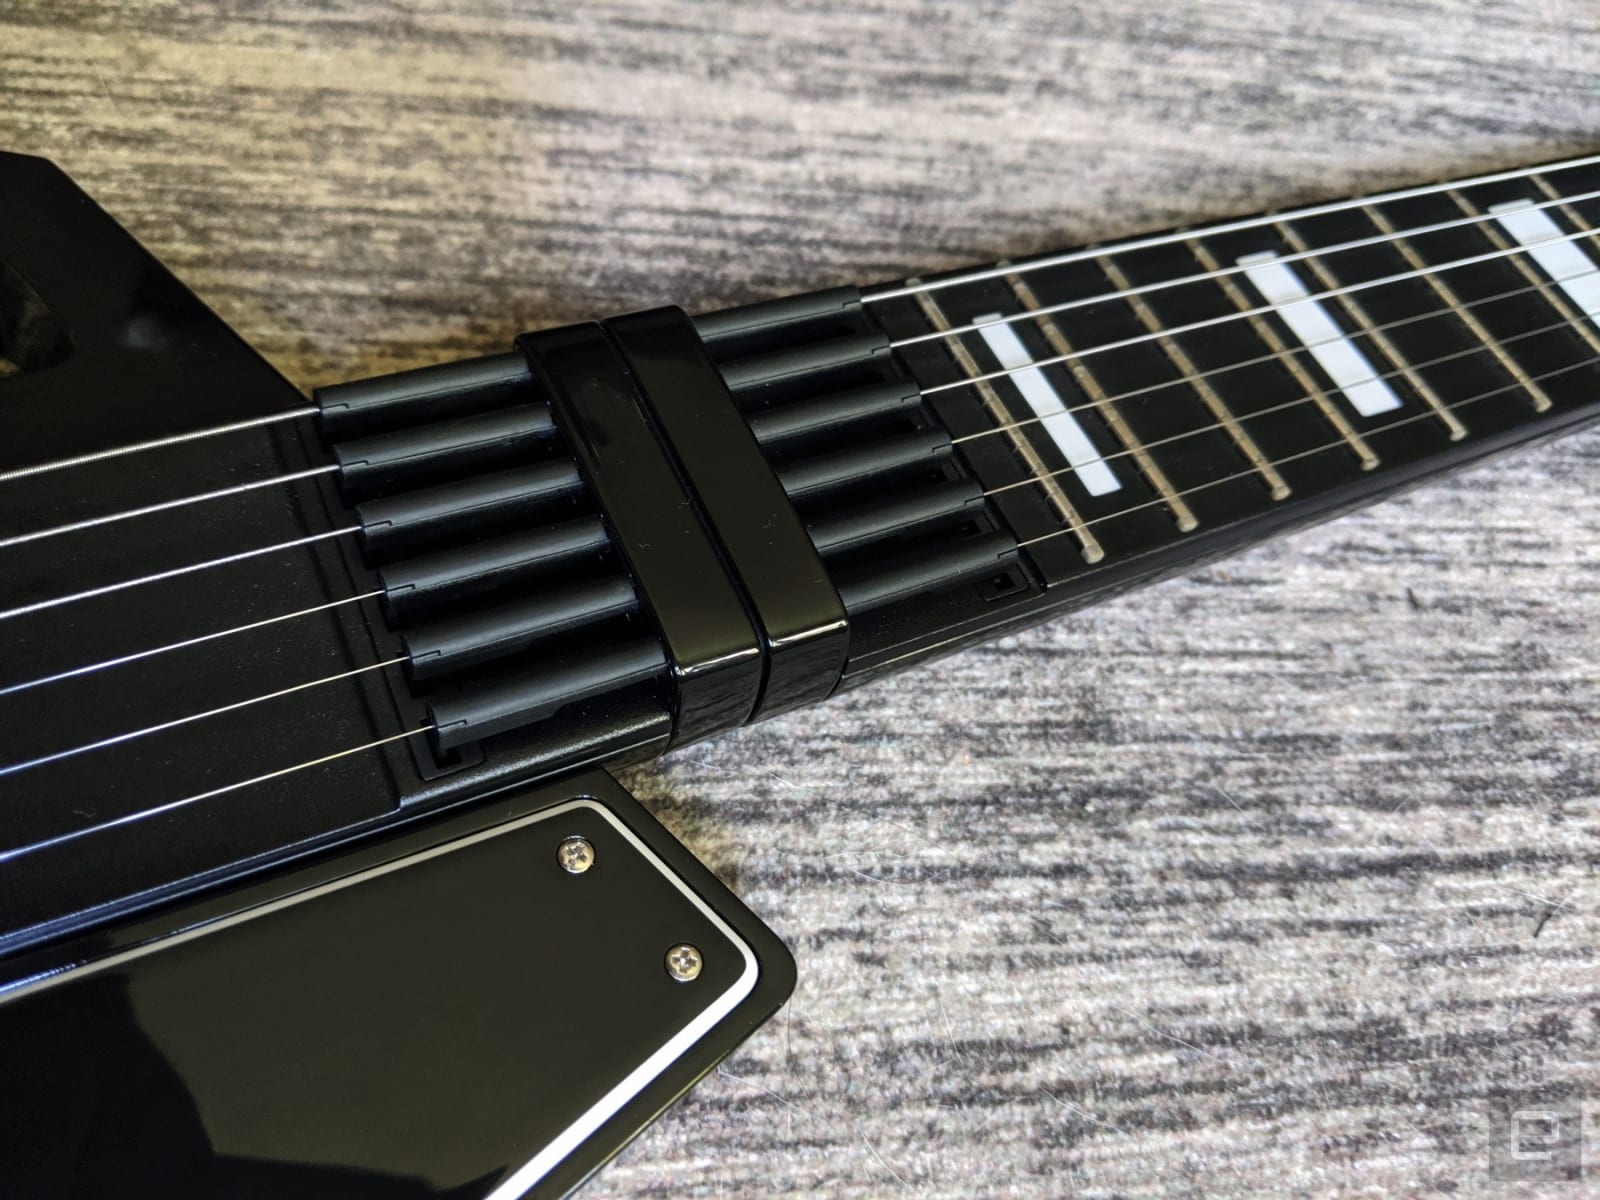 Jammy's digital guitar is a futuristic idea let down by today's 